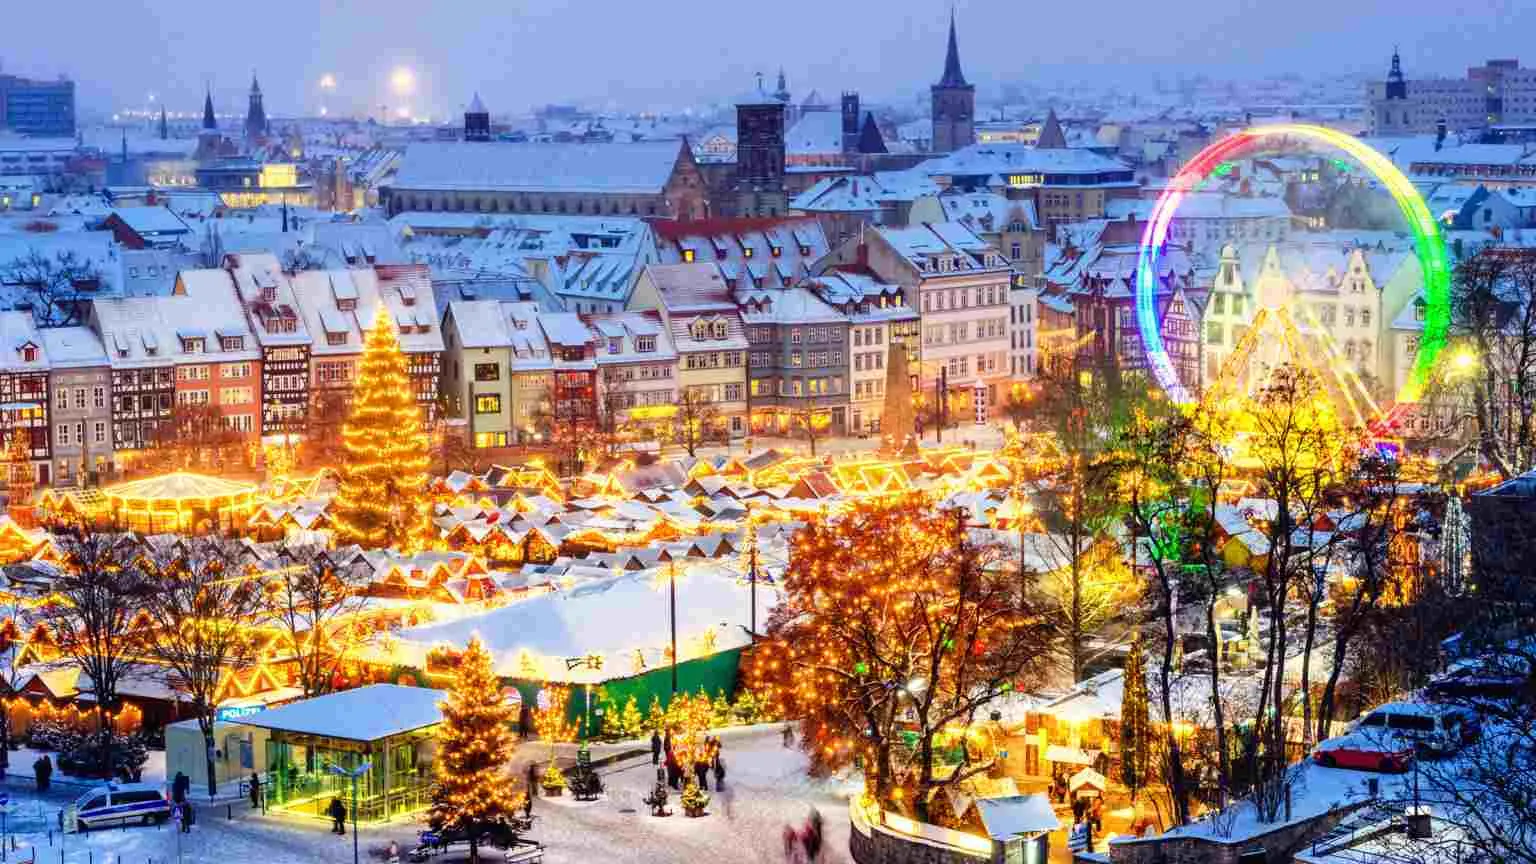 14 magical places to have a white Christmas | Finder